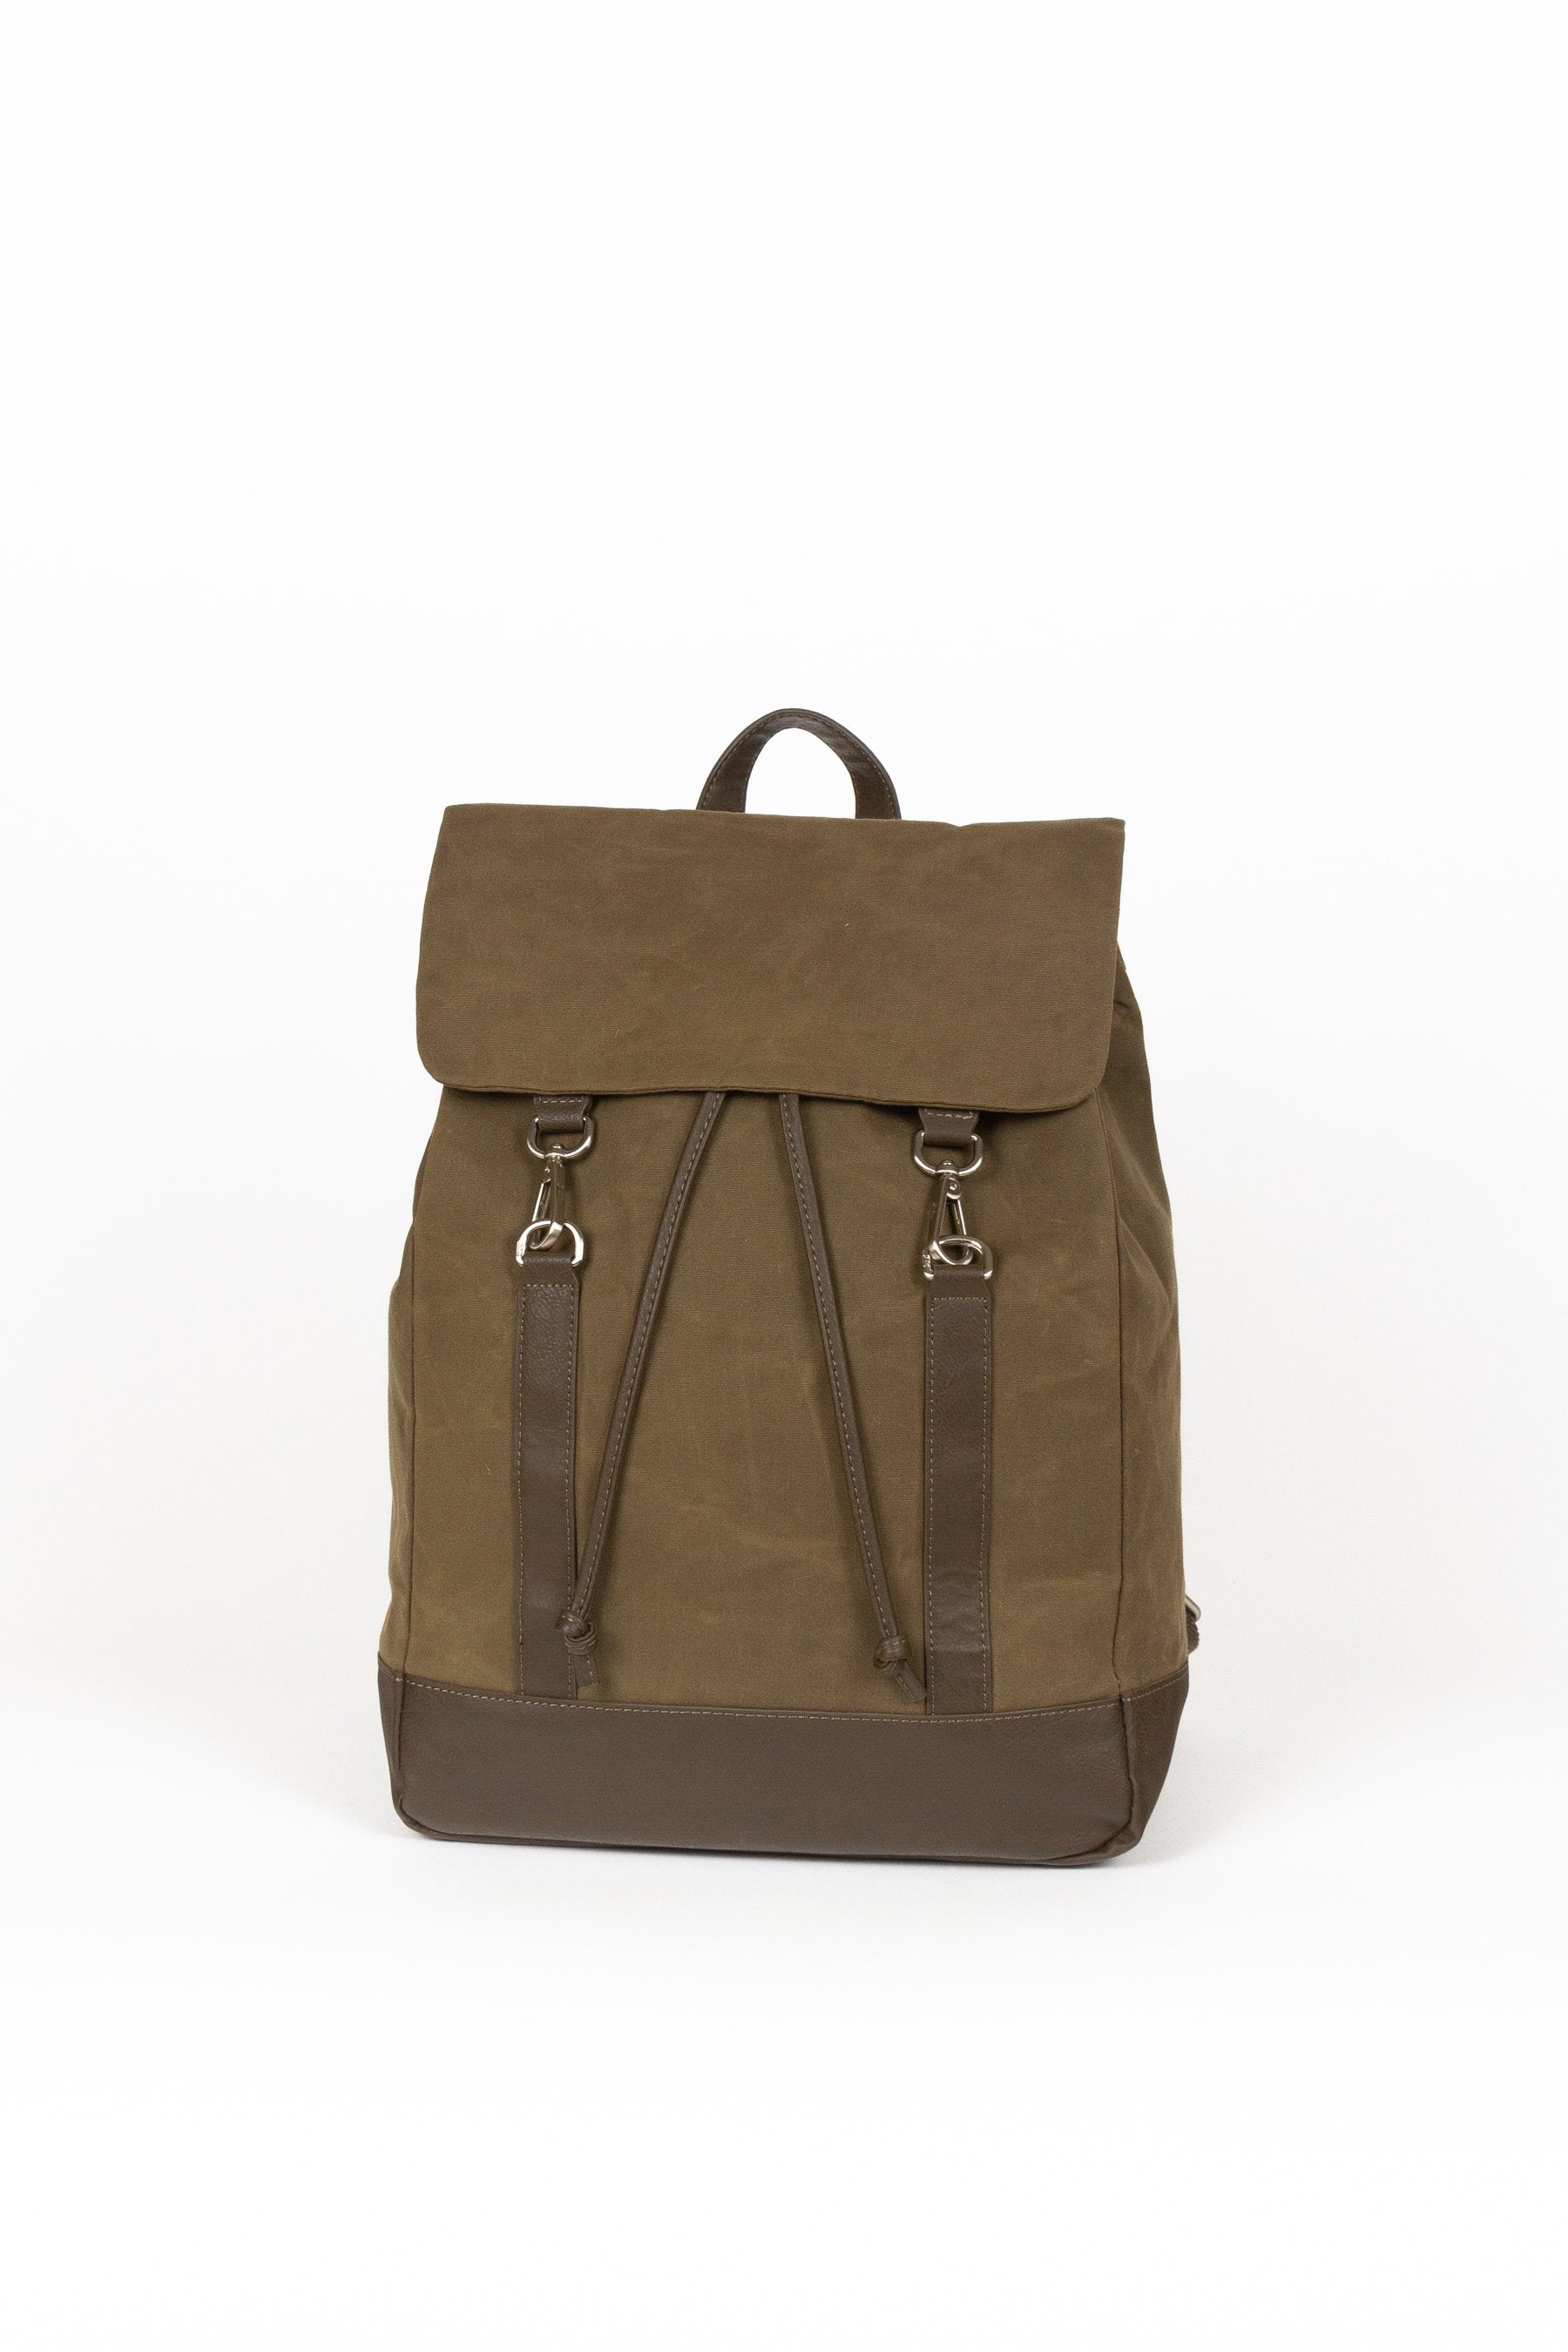 BEON.COM.AU Buy the Goteborg Drawstring Flip Top Backpack in olive by Jost Bags Jost at BEON.COM.AU